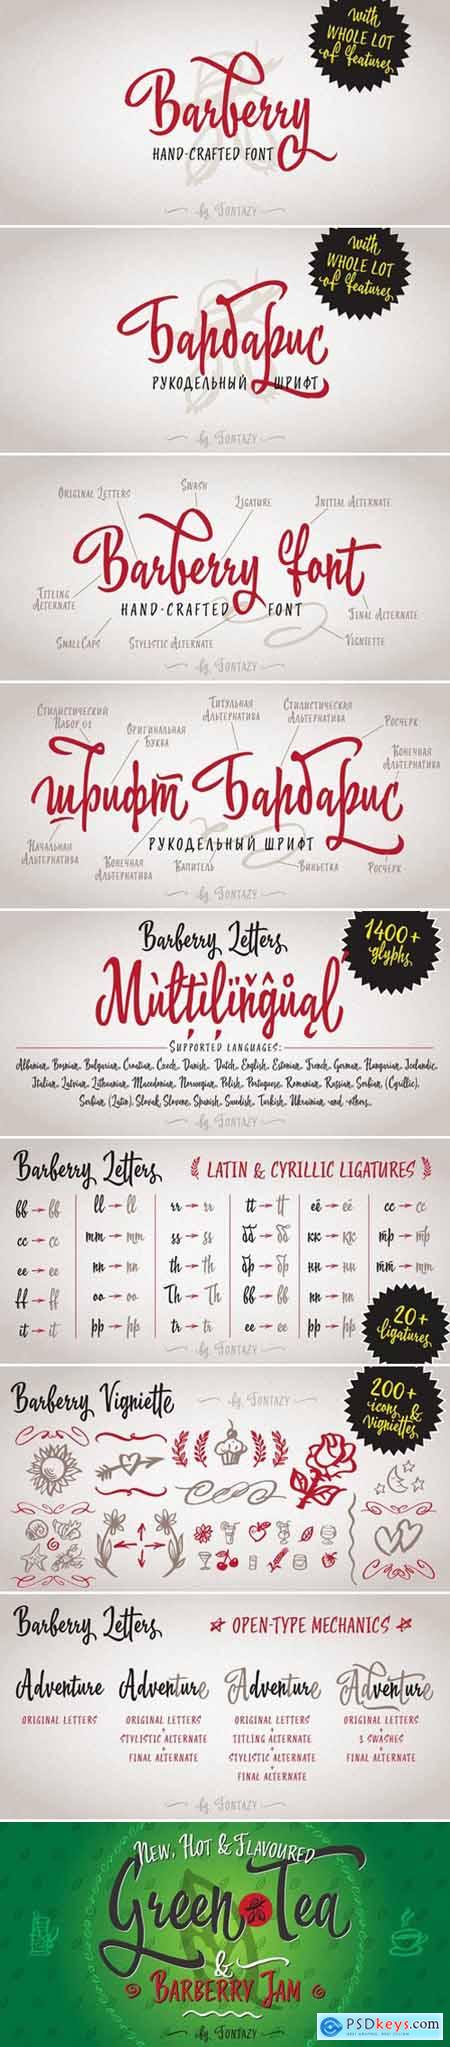 Barberry font family